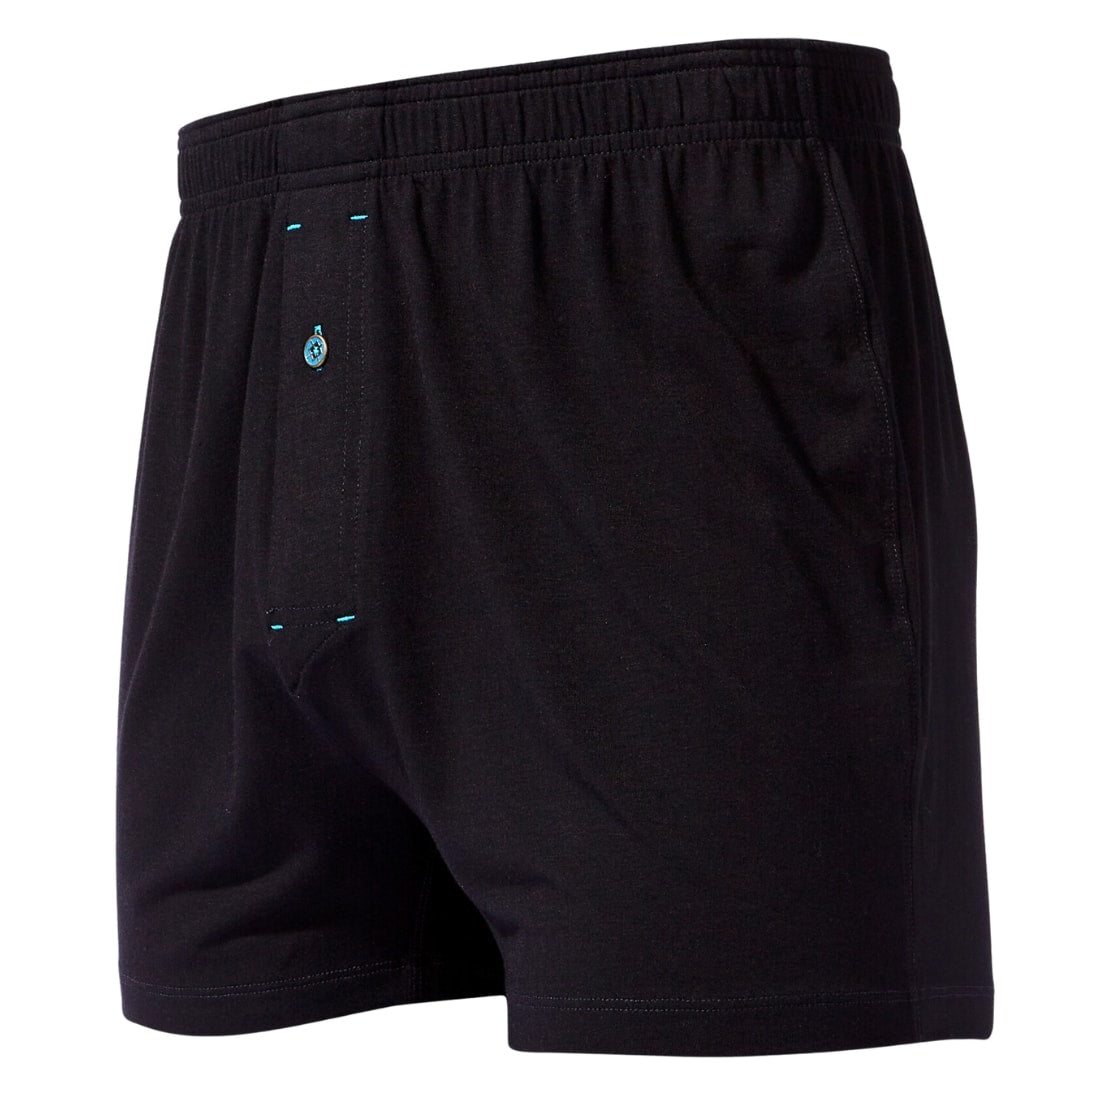 Stance Crosshatch Wholester Boxers in Black